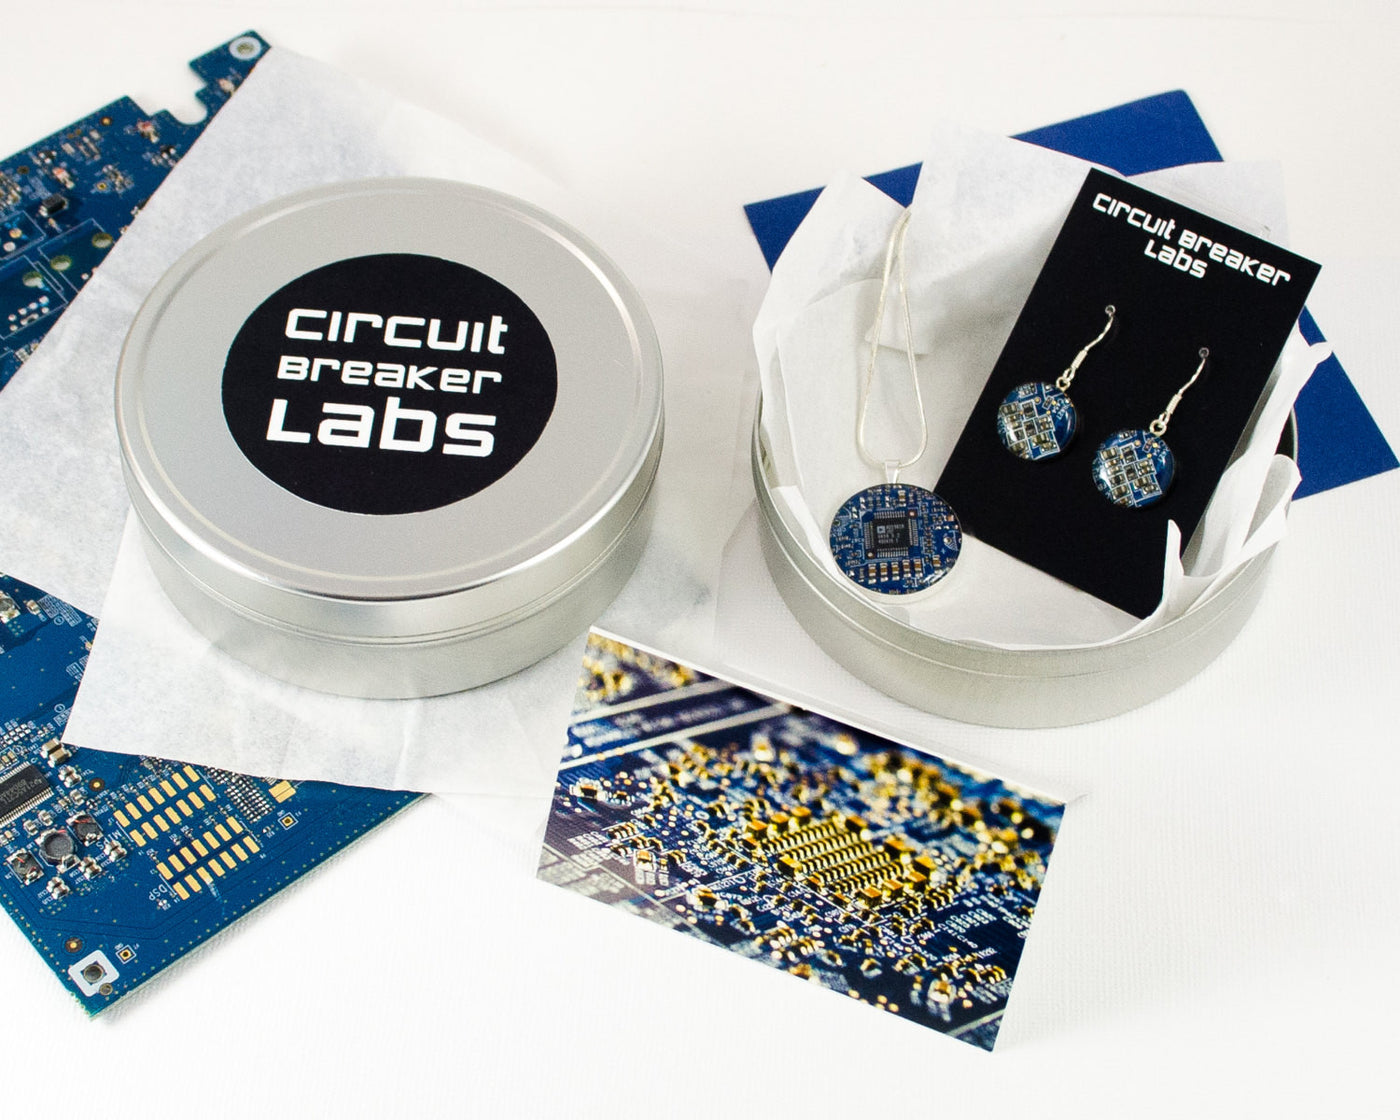 Circuit Board Gift Set - Retractable Badge Holder, Cufflinks, and Tie Bar